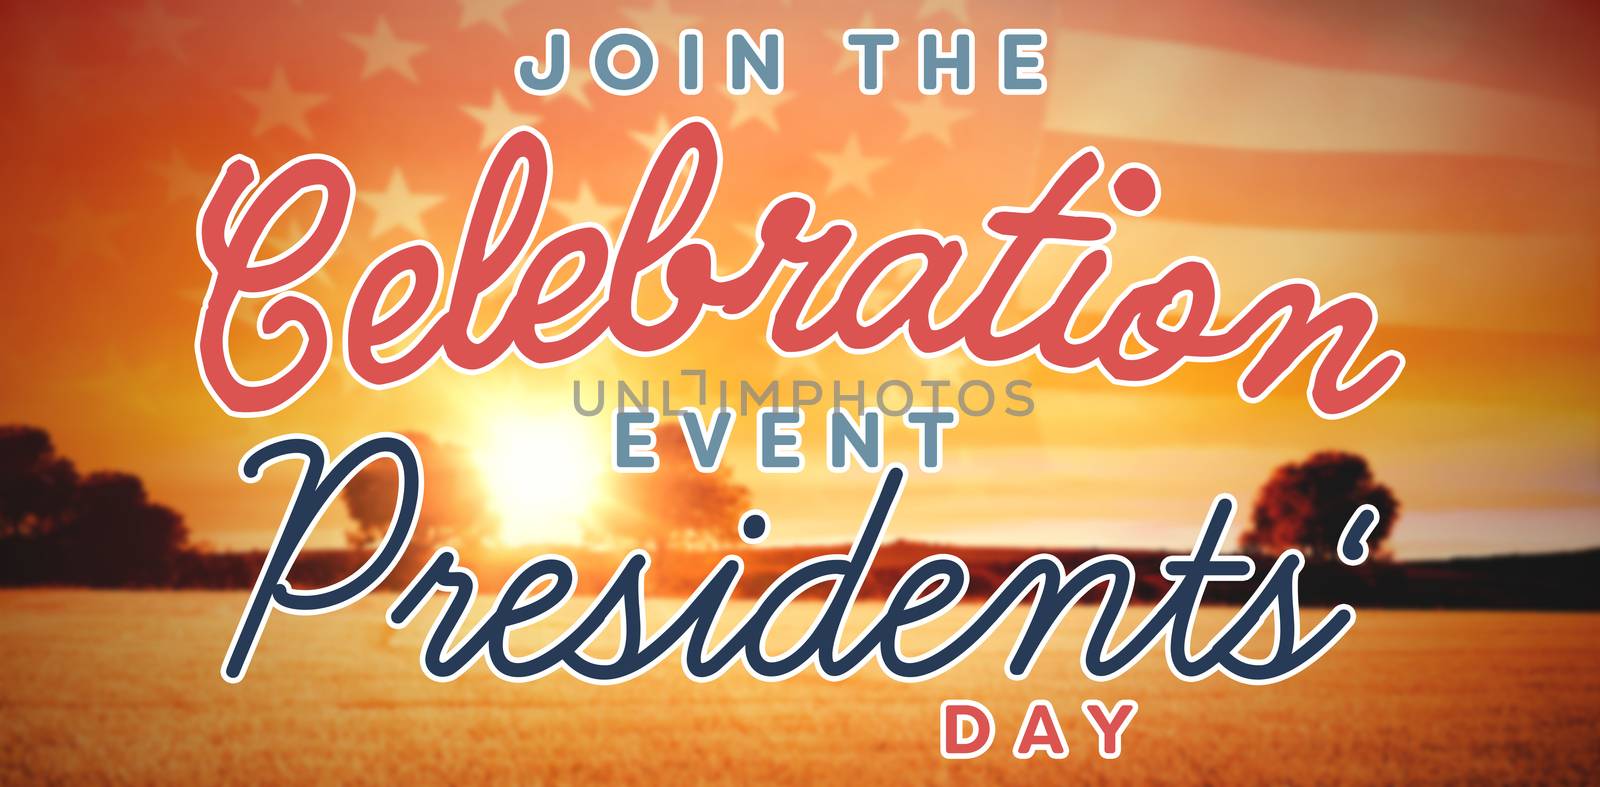 Composite image of happy presidents day message by Wavebreakmedia